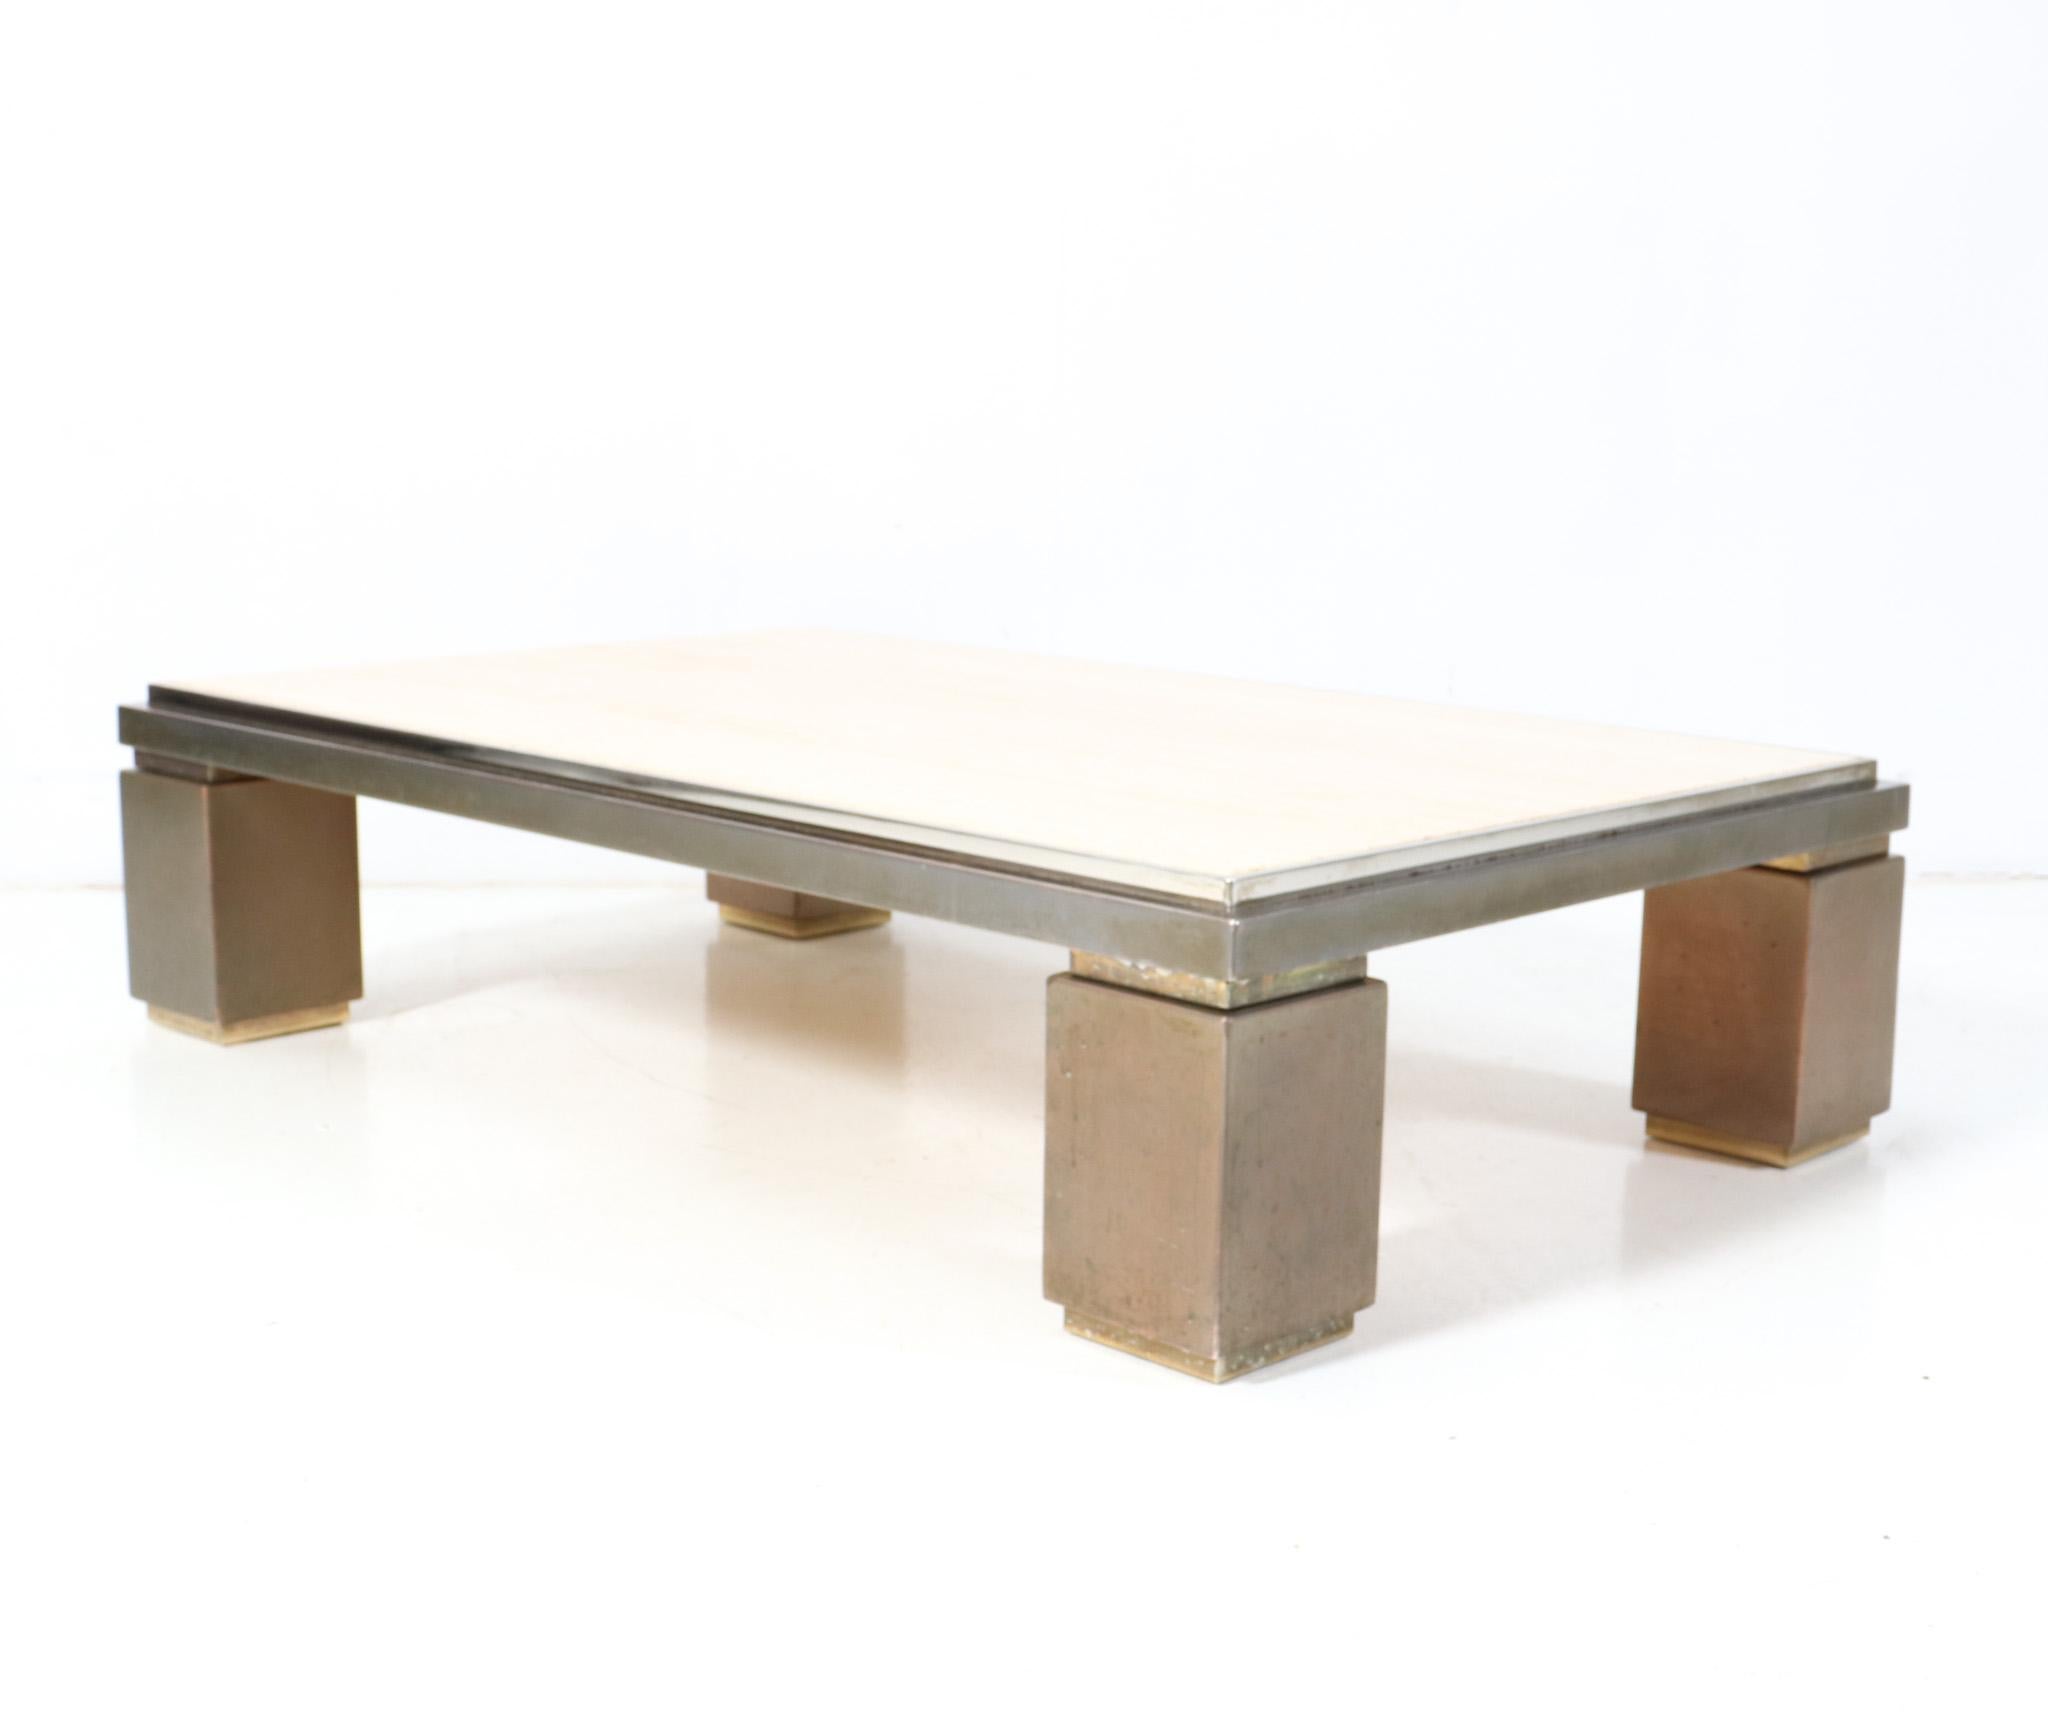 Belgian Hollywood Regency  Coffee Table by Belgo Chrome with Travertine Top, 1970s For Sale